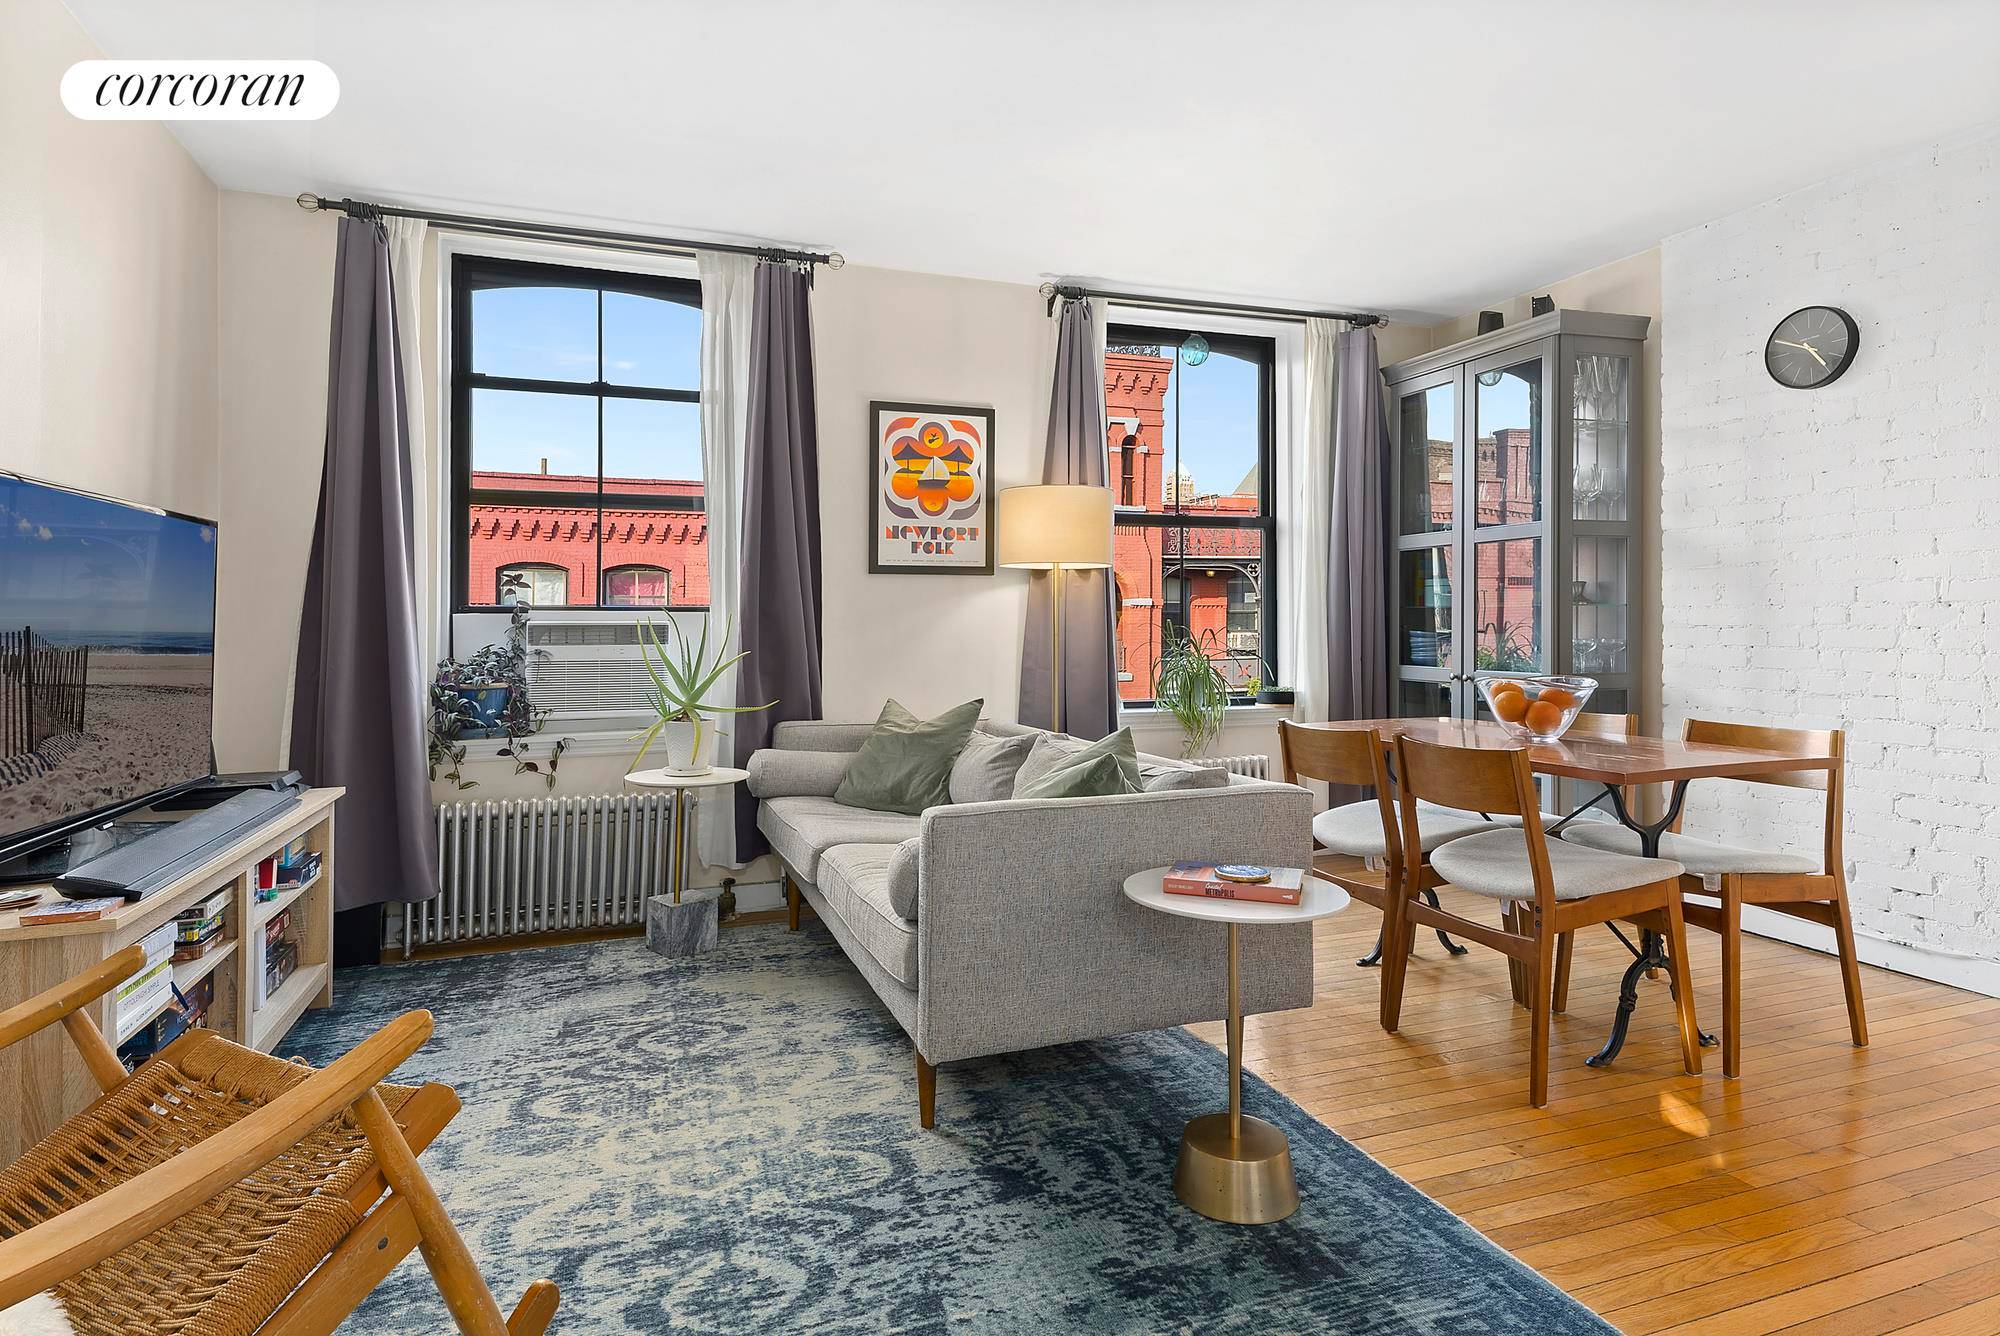 NEW ! ! Welcome home to Cobble hill, with tree lined blocks and iconic architecture.